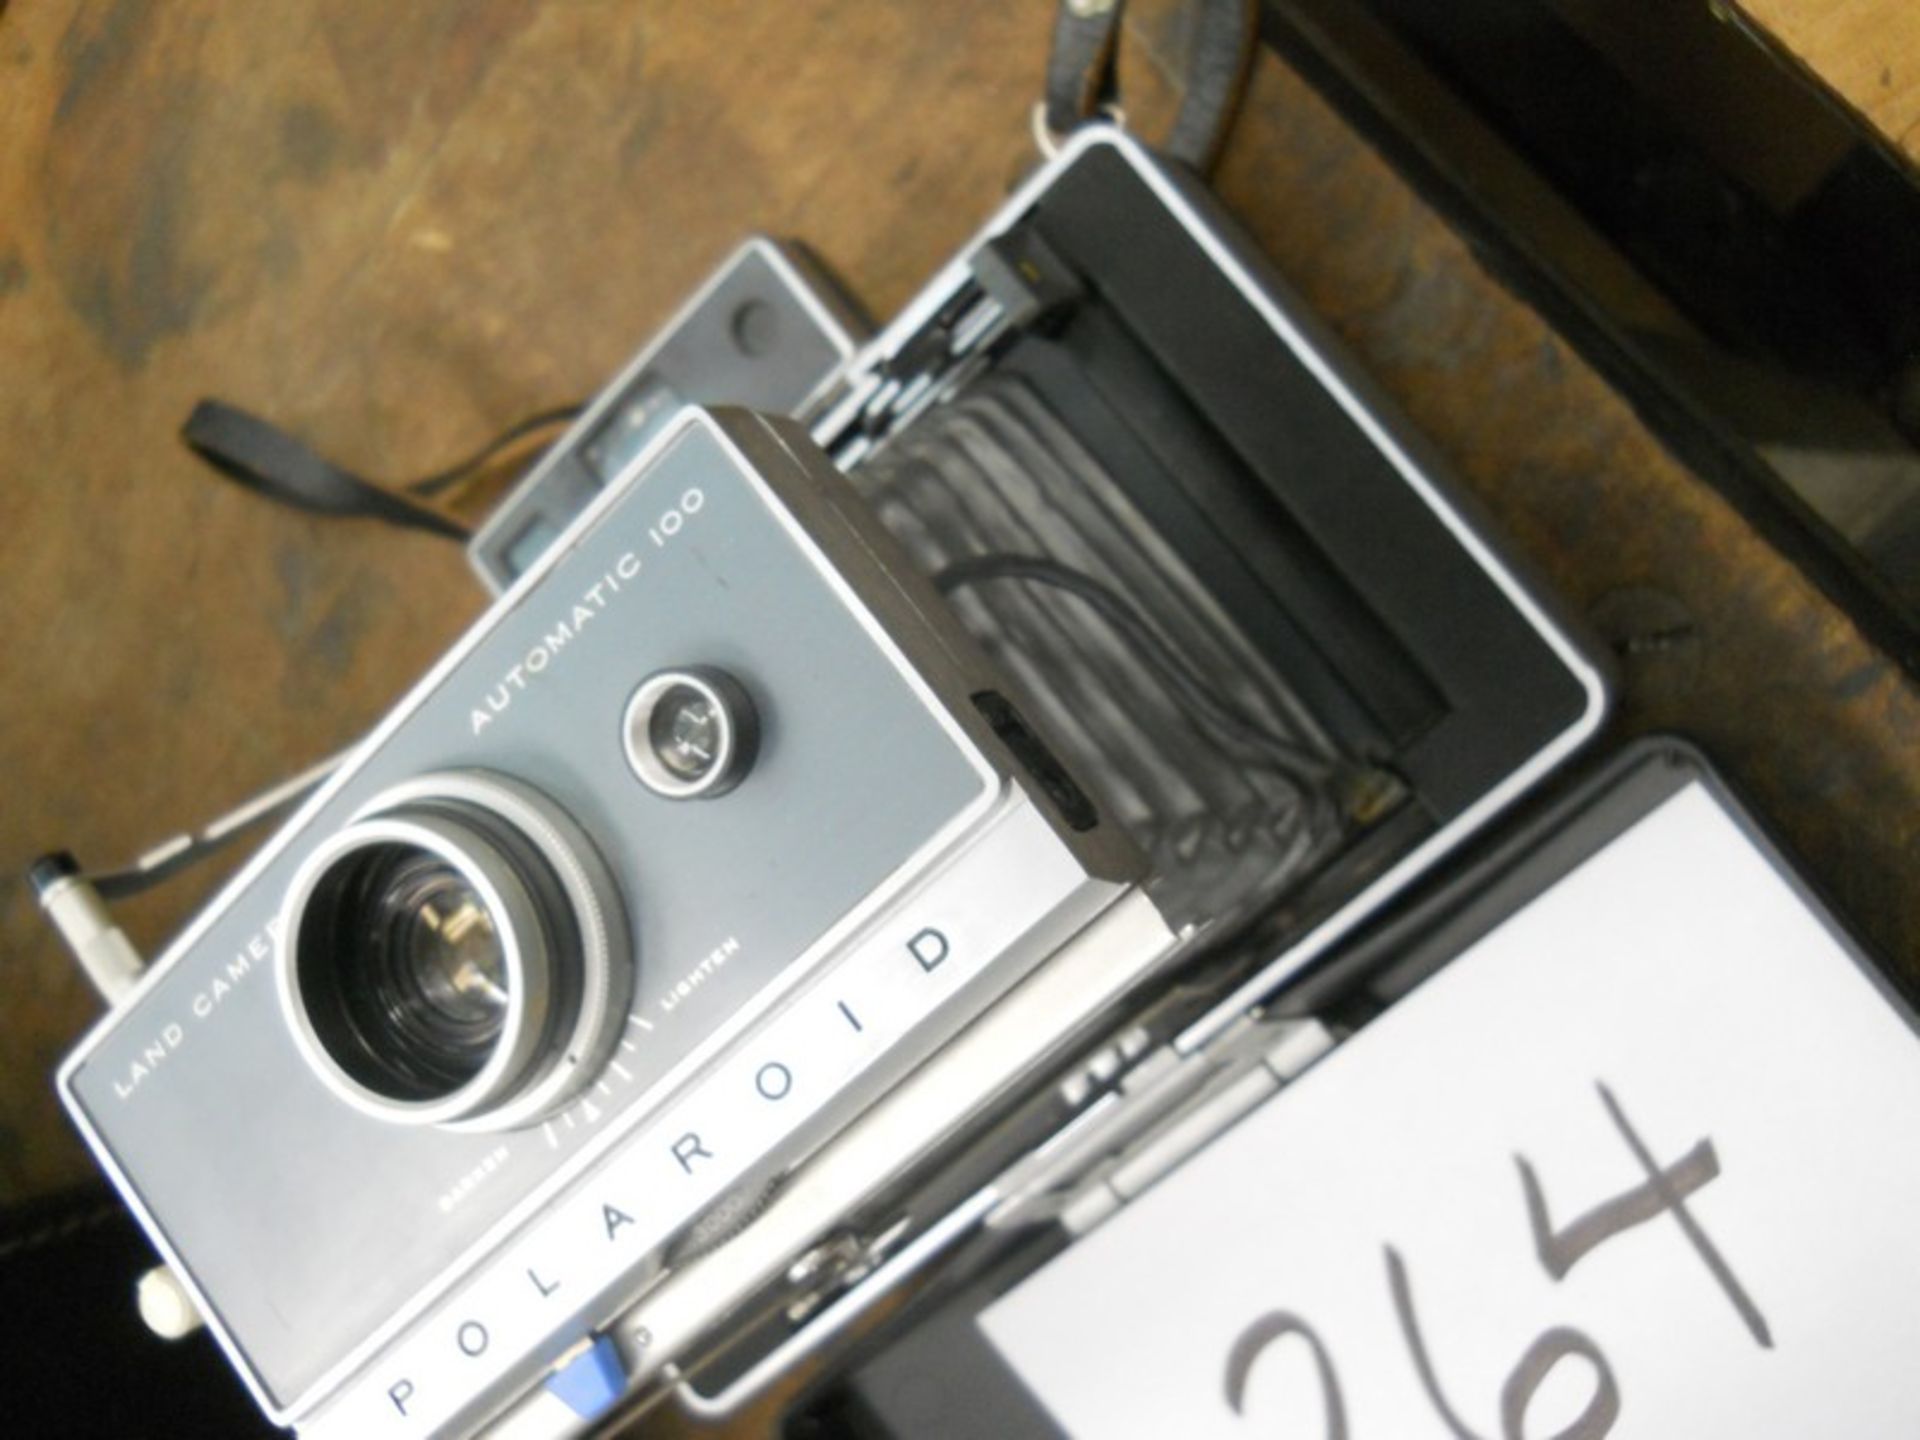 Polaroid Automatic 100 Land Camera. With Auxiliary Flash Unit, Carrying Case - Image 4 of 9